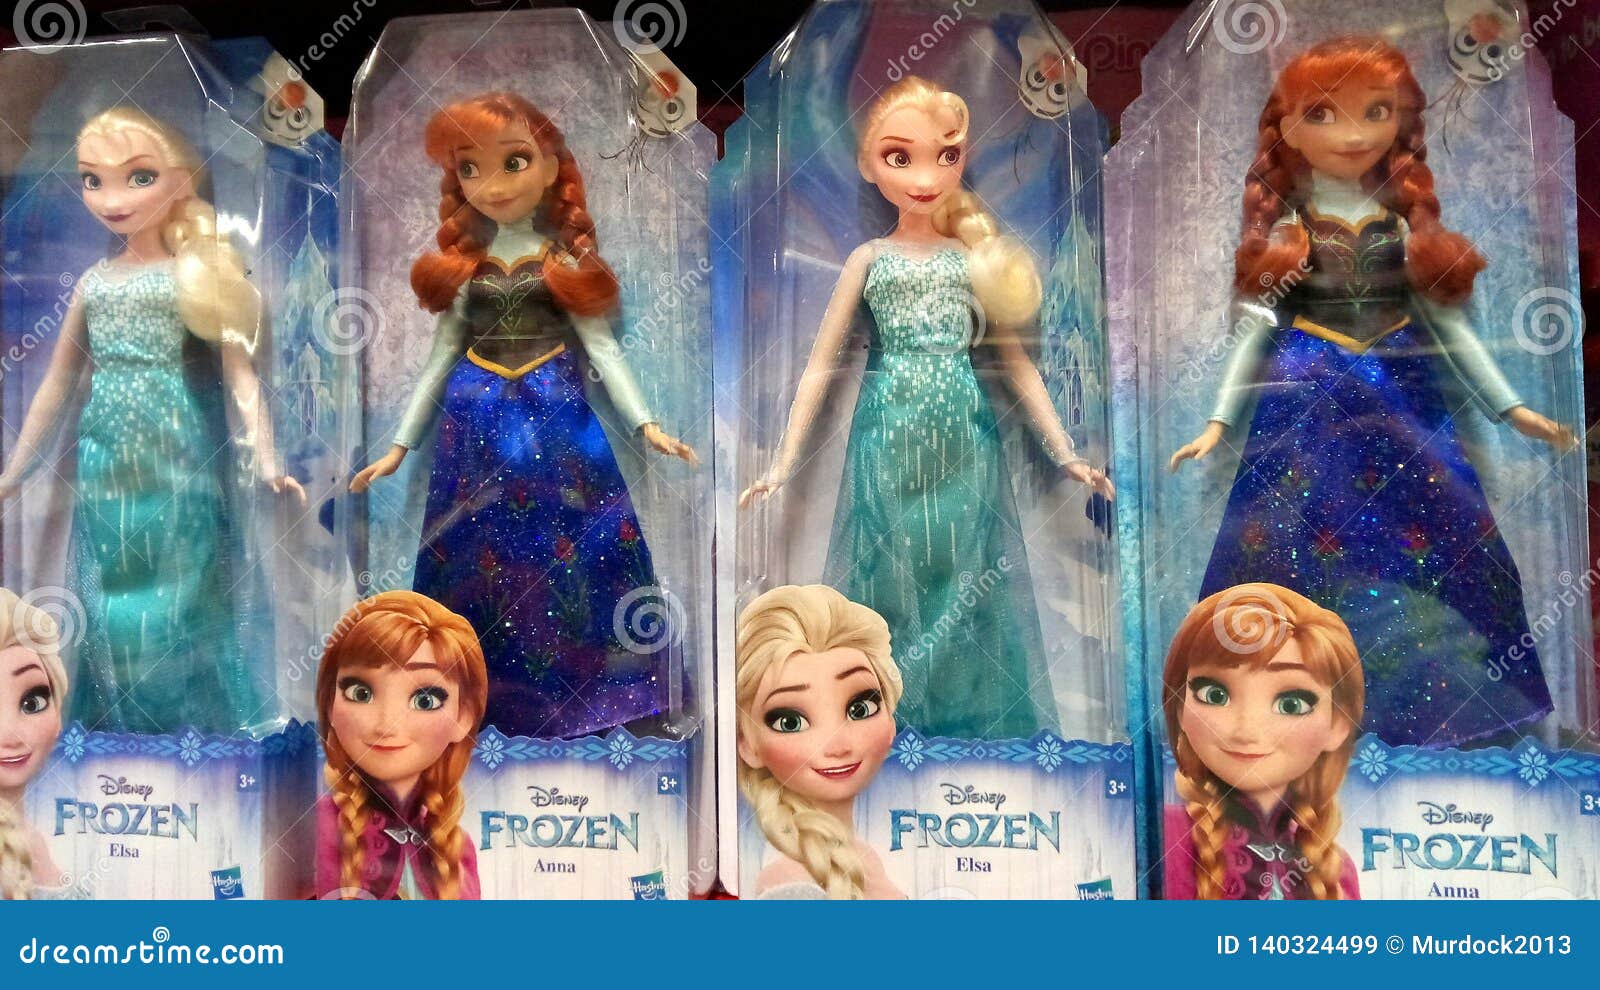 Disney Frozen Elsa and Anna Dolls Editorial Stock Image - Image of ...